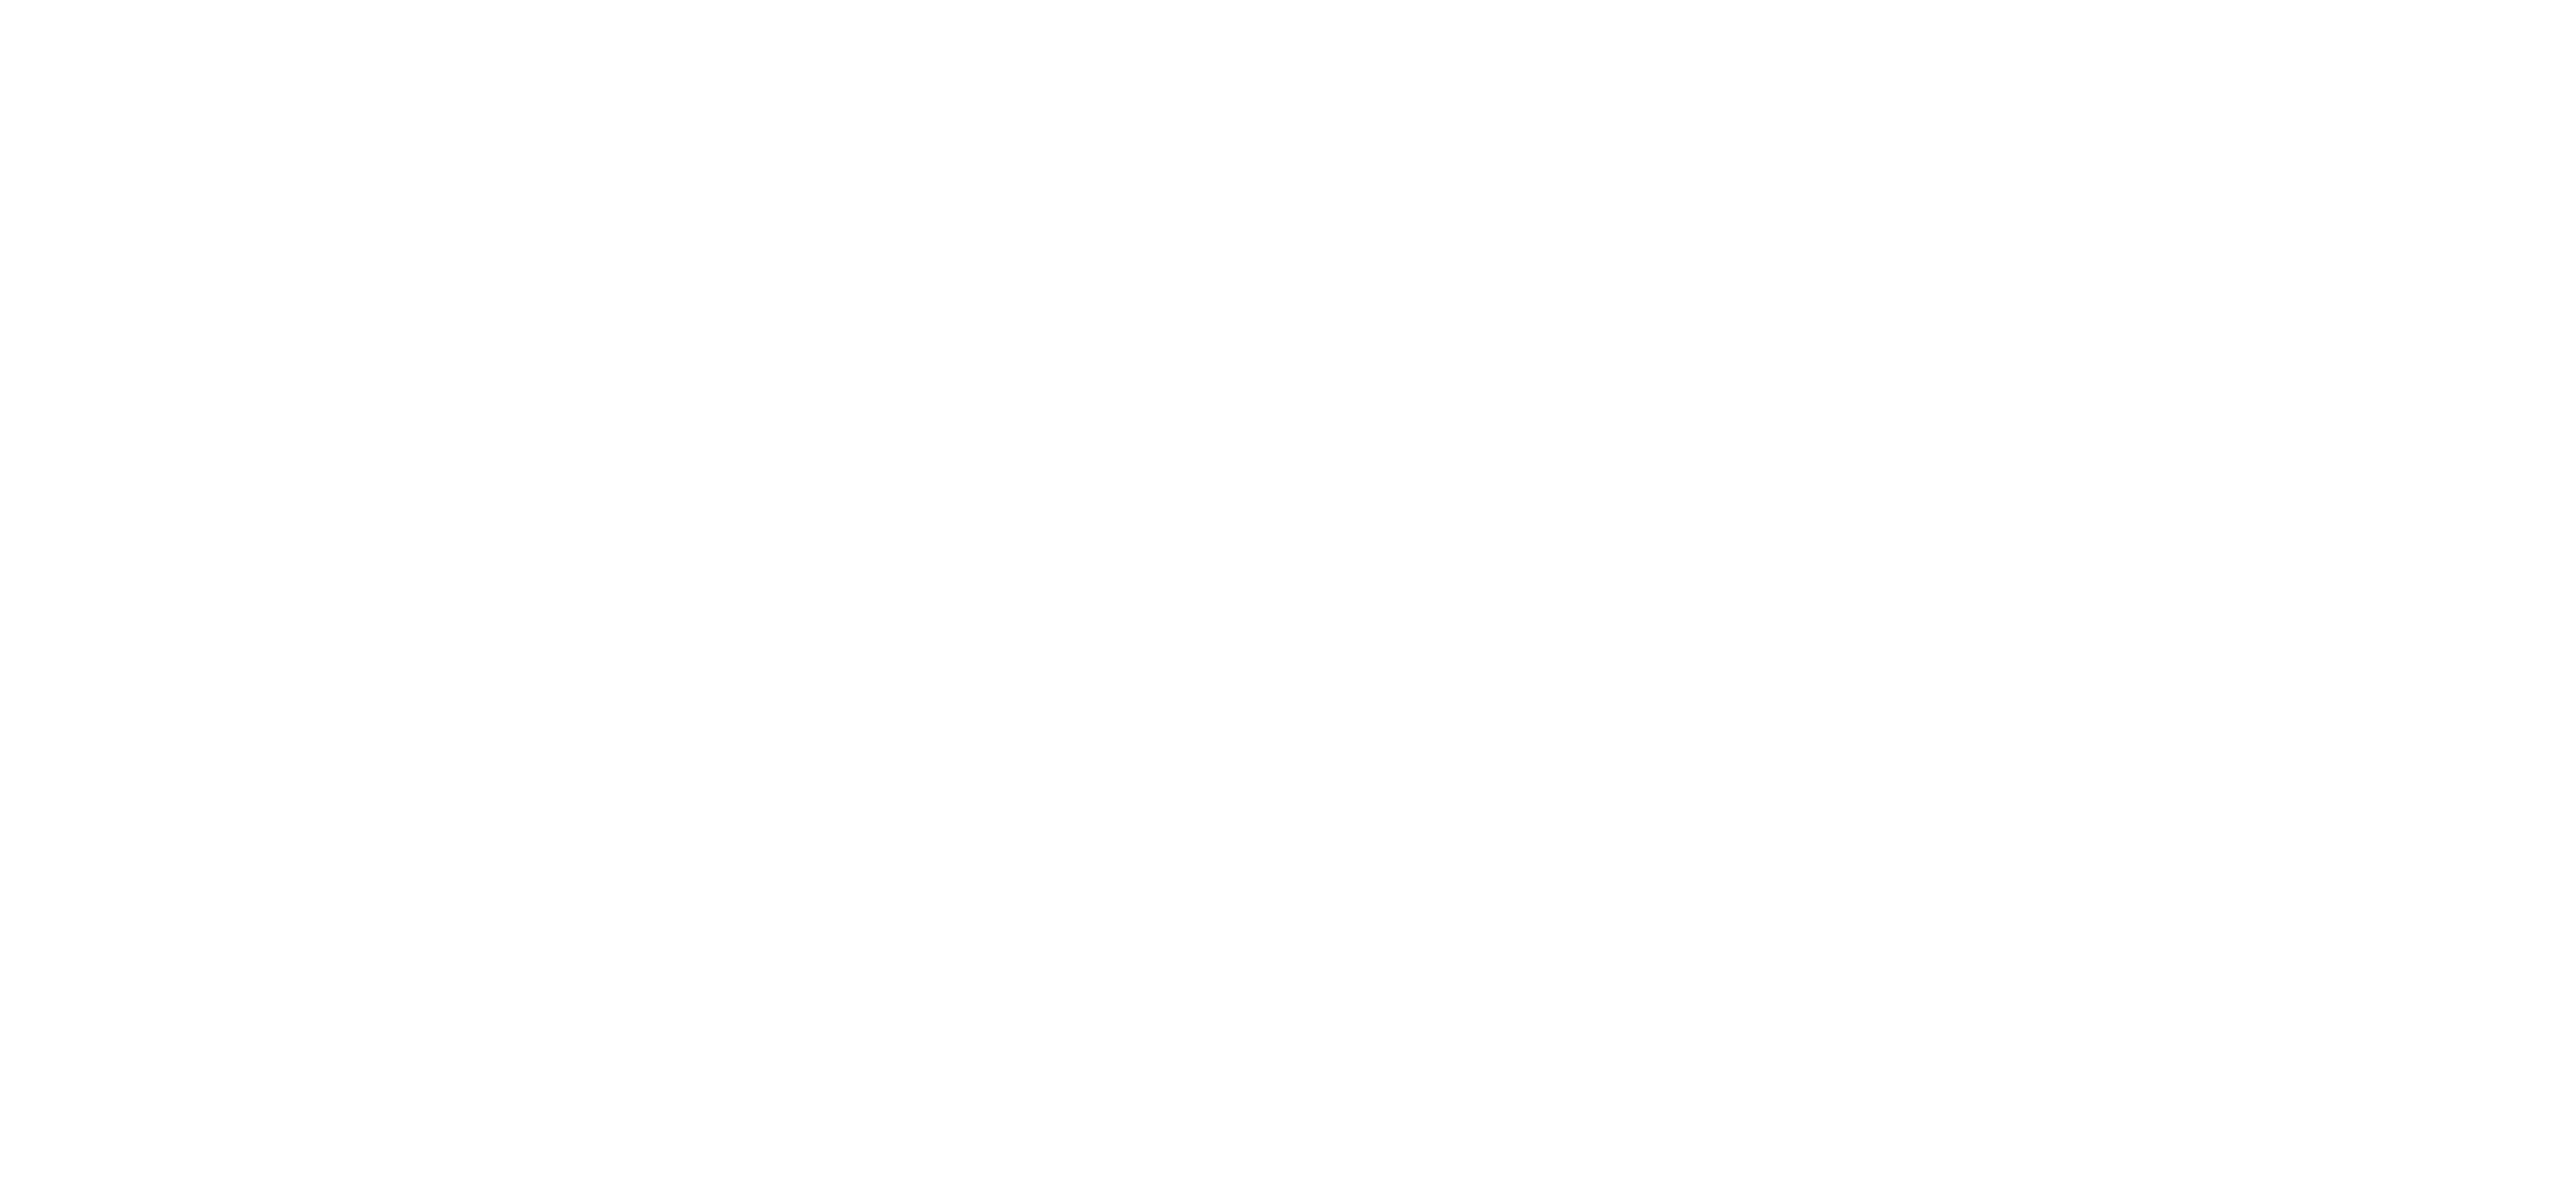 The Reserve at Ballenger Creek Apartments corporate logo